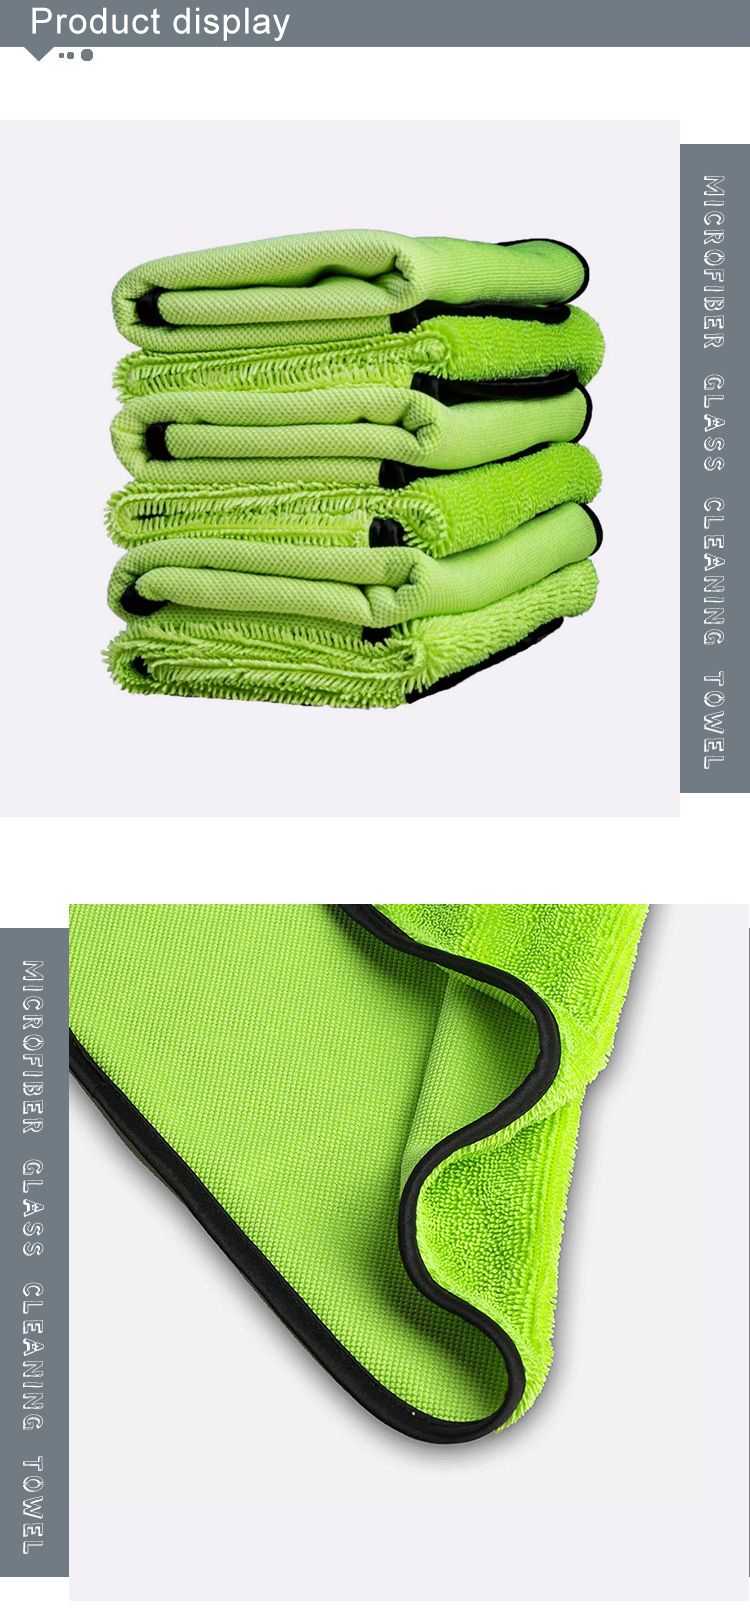 New launched products Soft Satin stitched wholesale microfiber glasses cloth custom windows